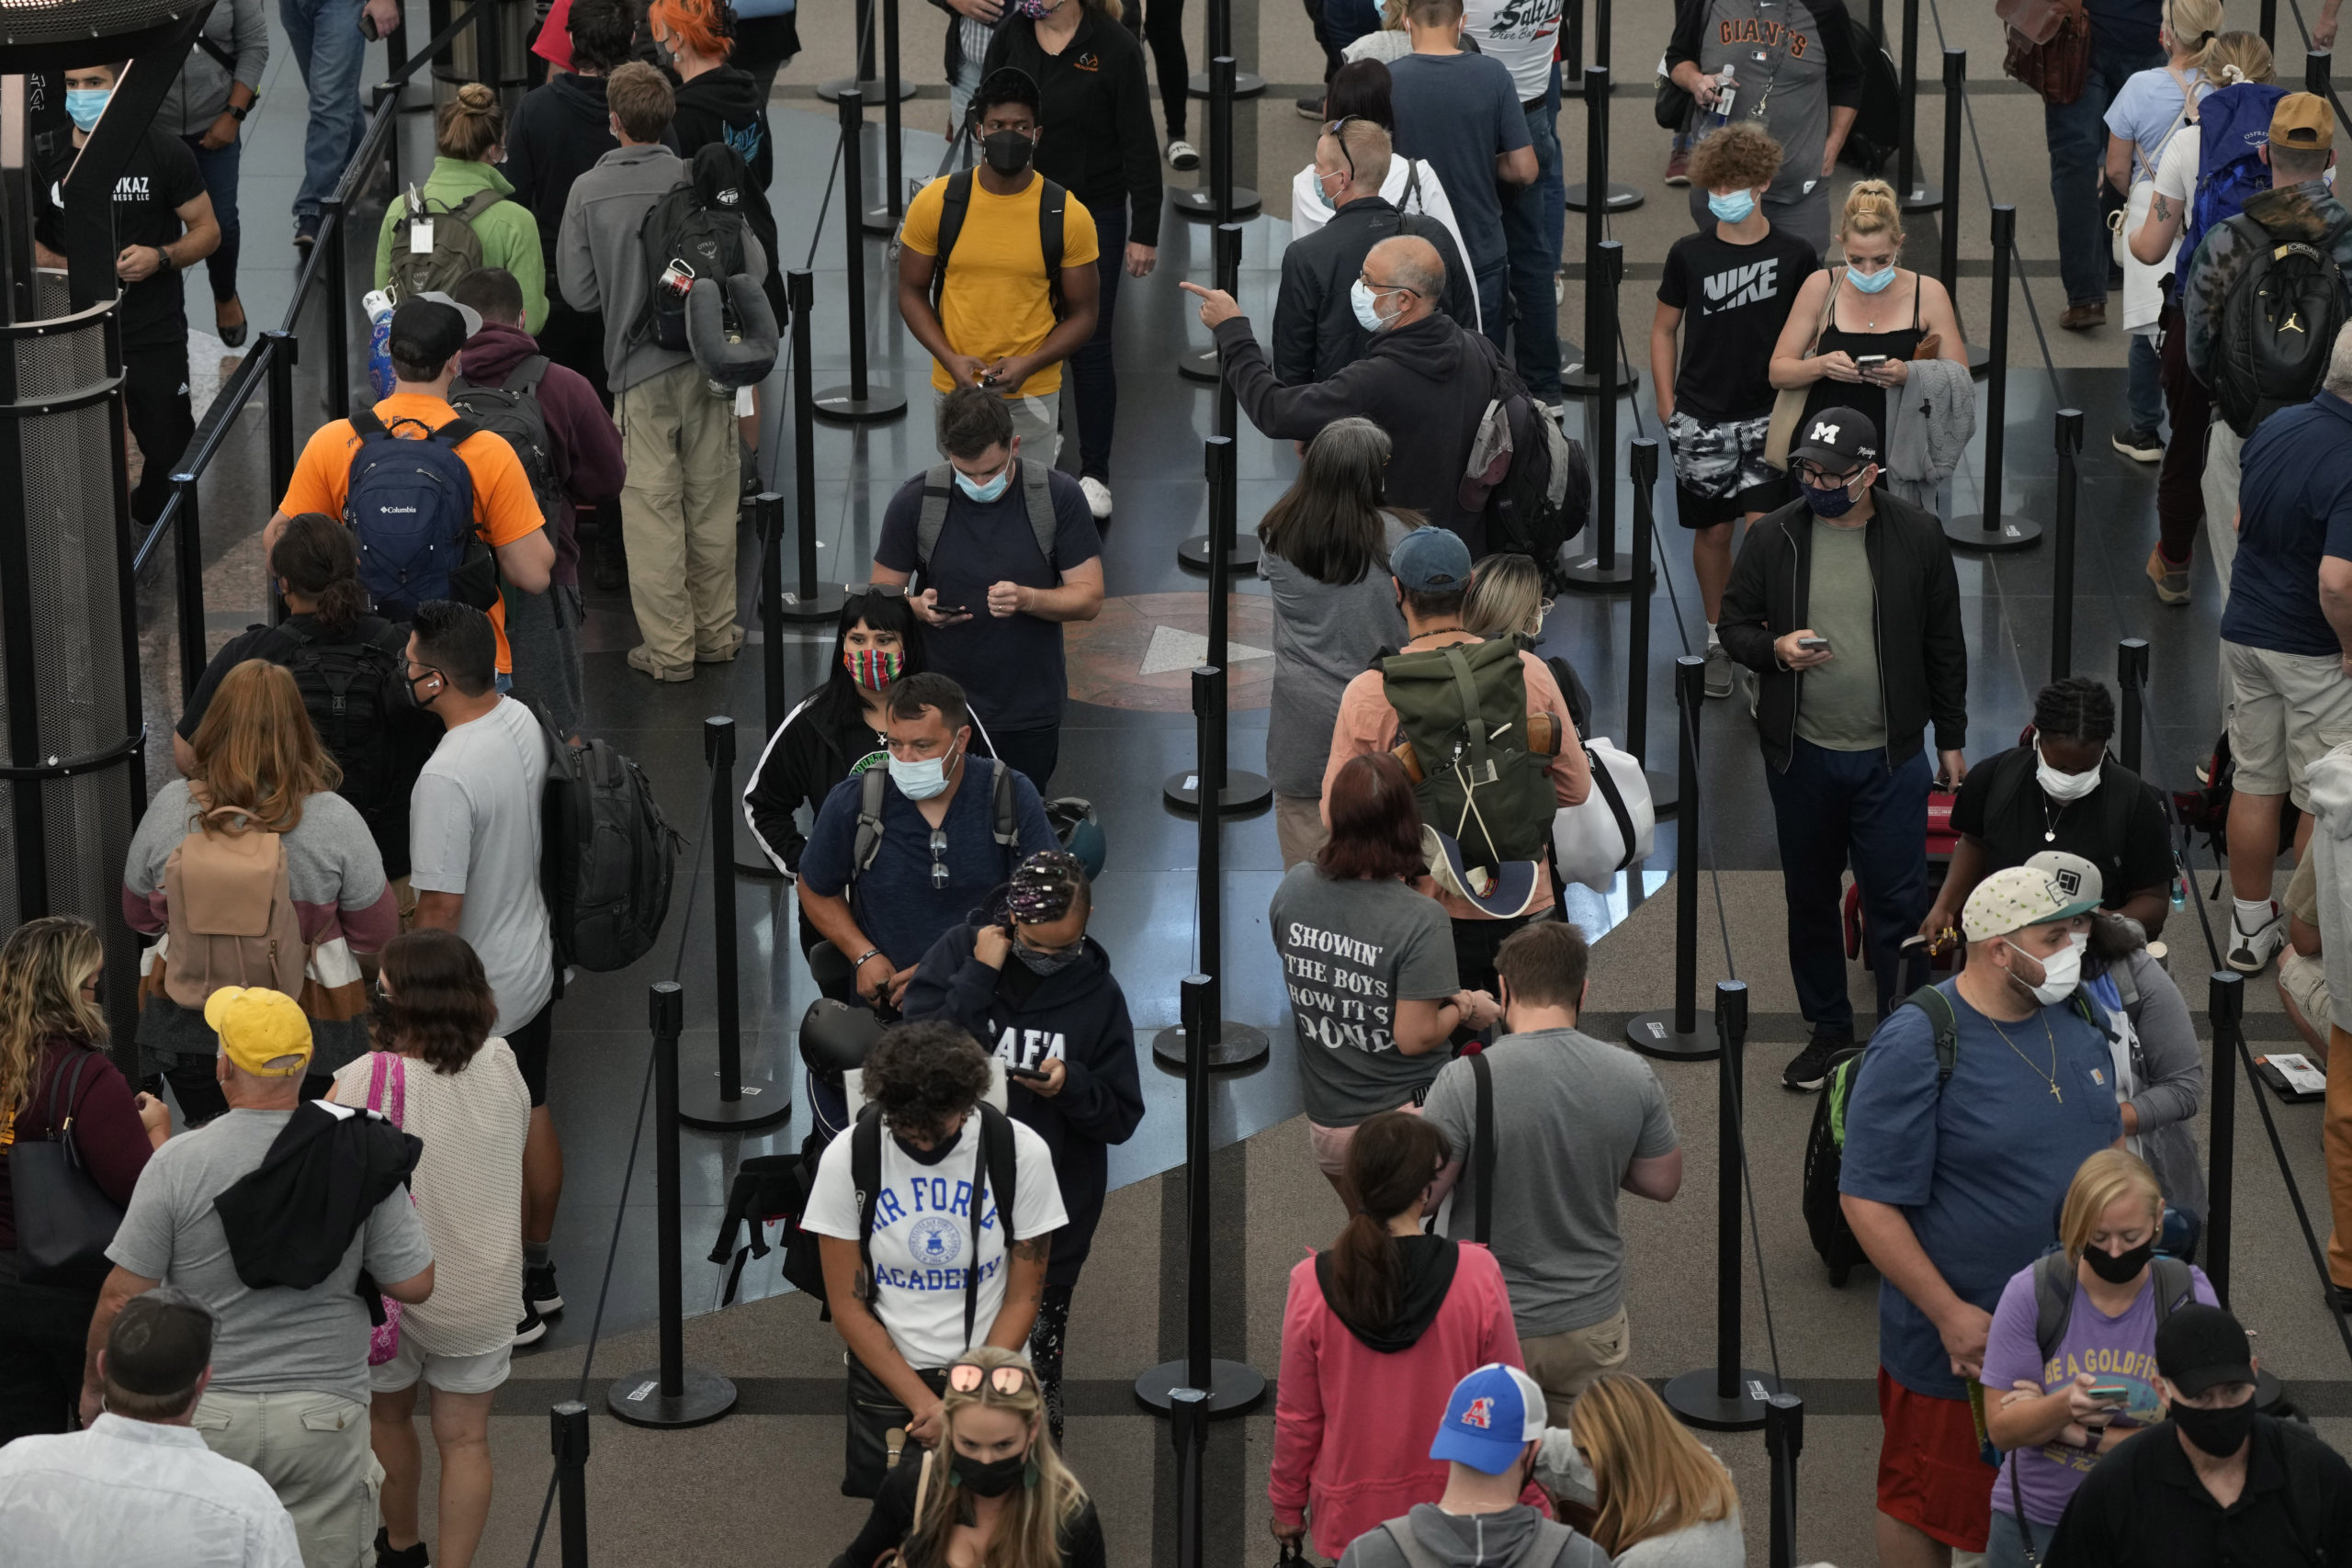 Travelers queue up at the north security checkpoint in Denver International Airport on Sept. 14, 2021, in Denver